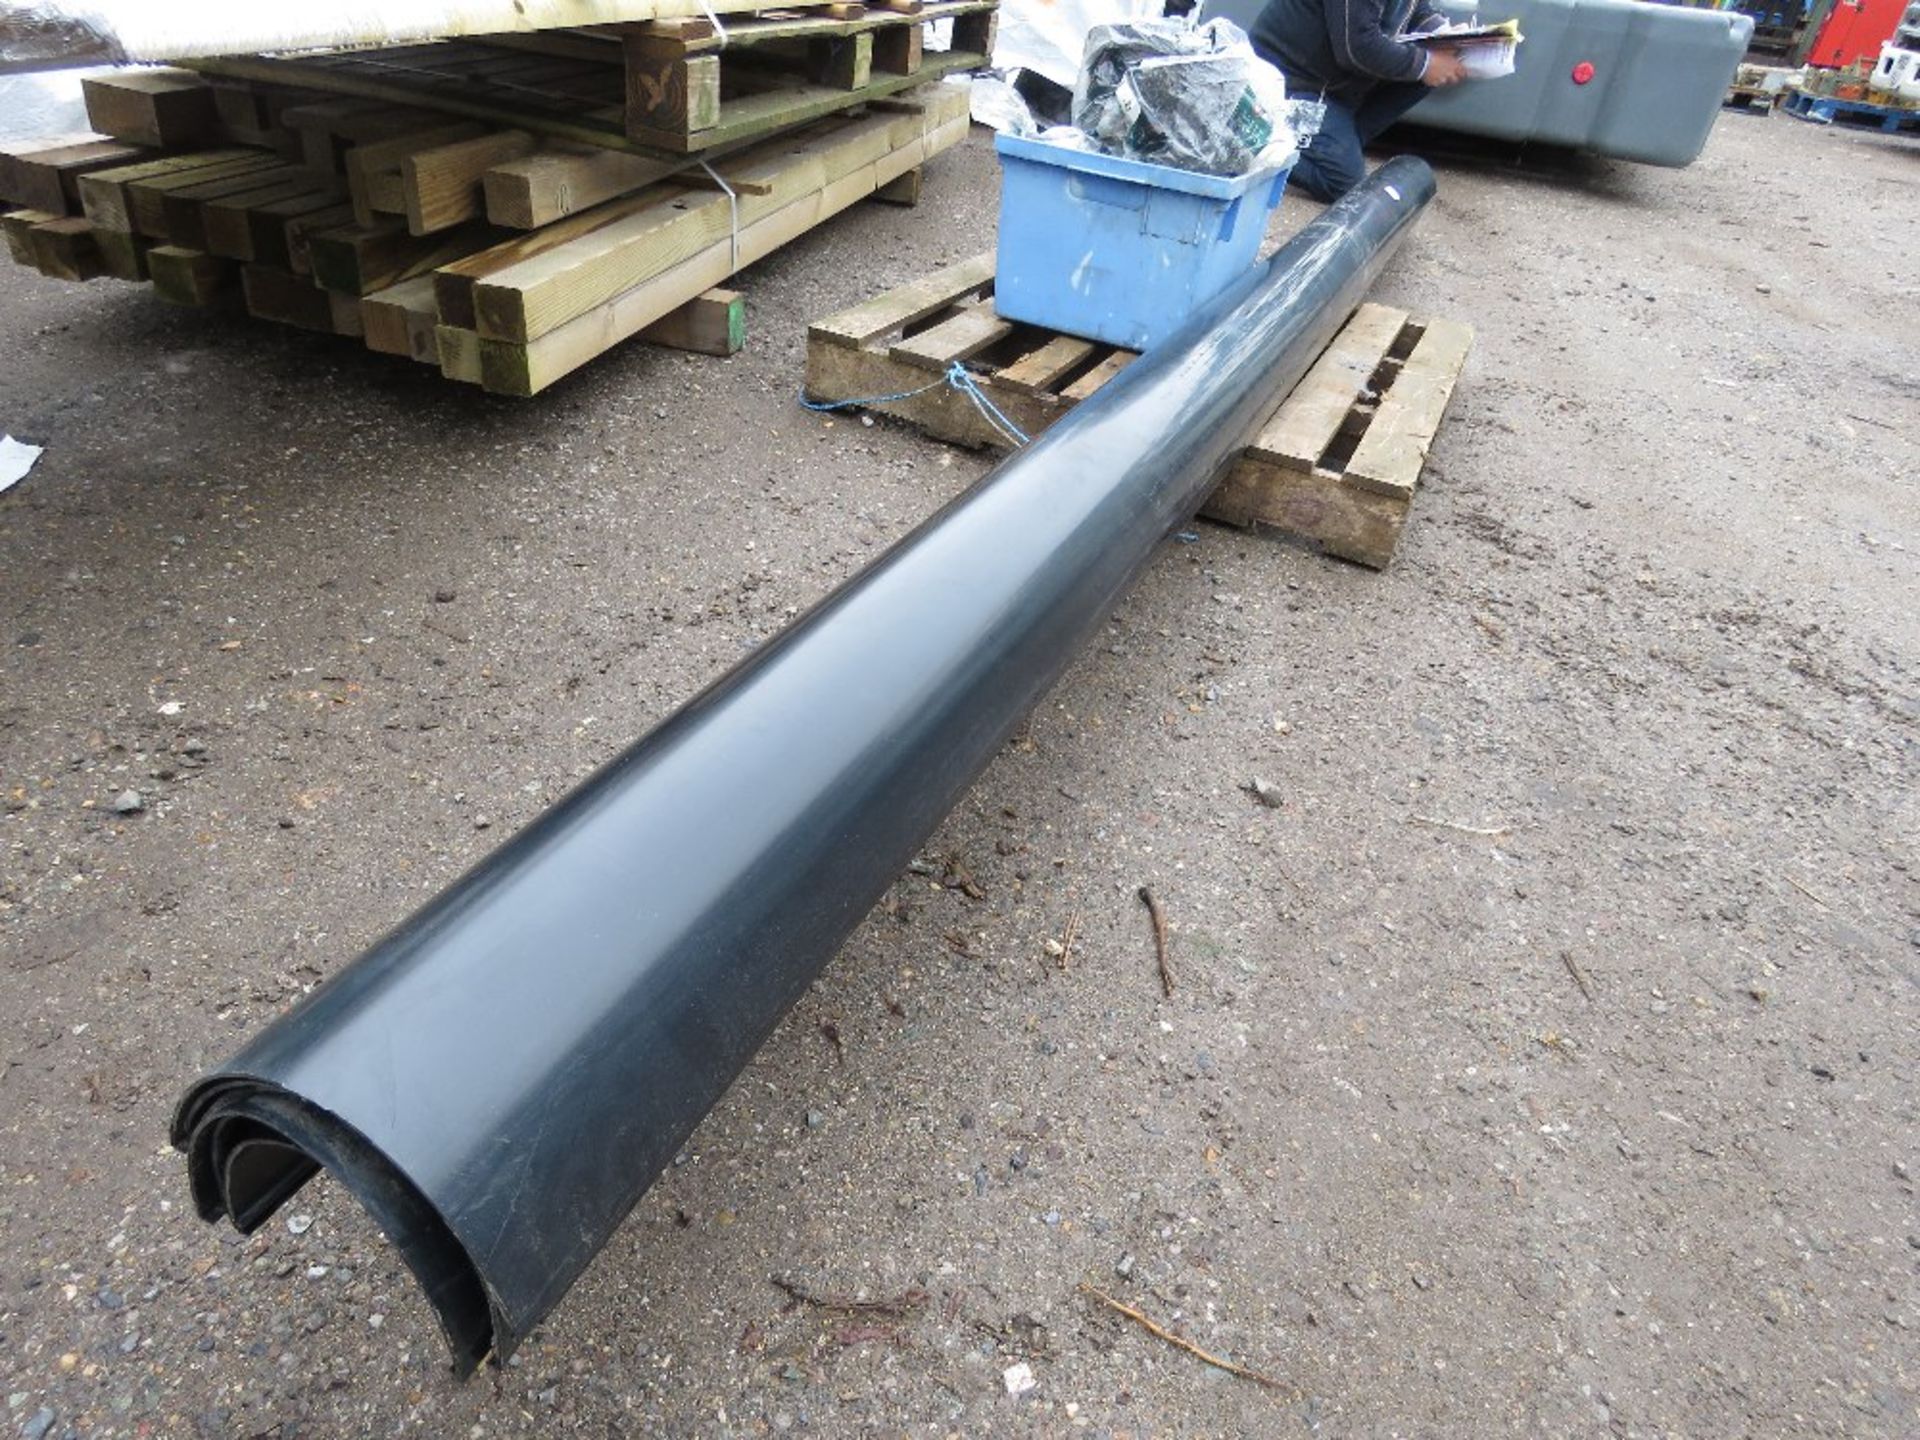 7 X LENGTHS OF LARGE FLOW PLASTIC GUTTER PLUS FITTINGS, UNUSED. 20CM WIDTH X 4M LENGTH APPROX. TH - Image 5 of 5